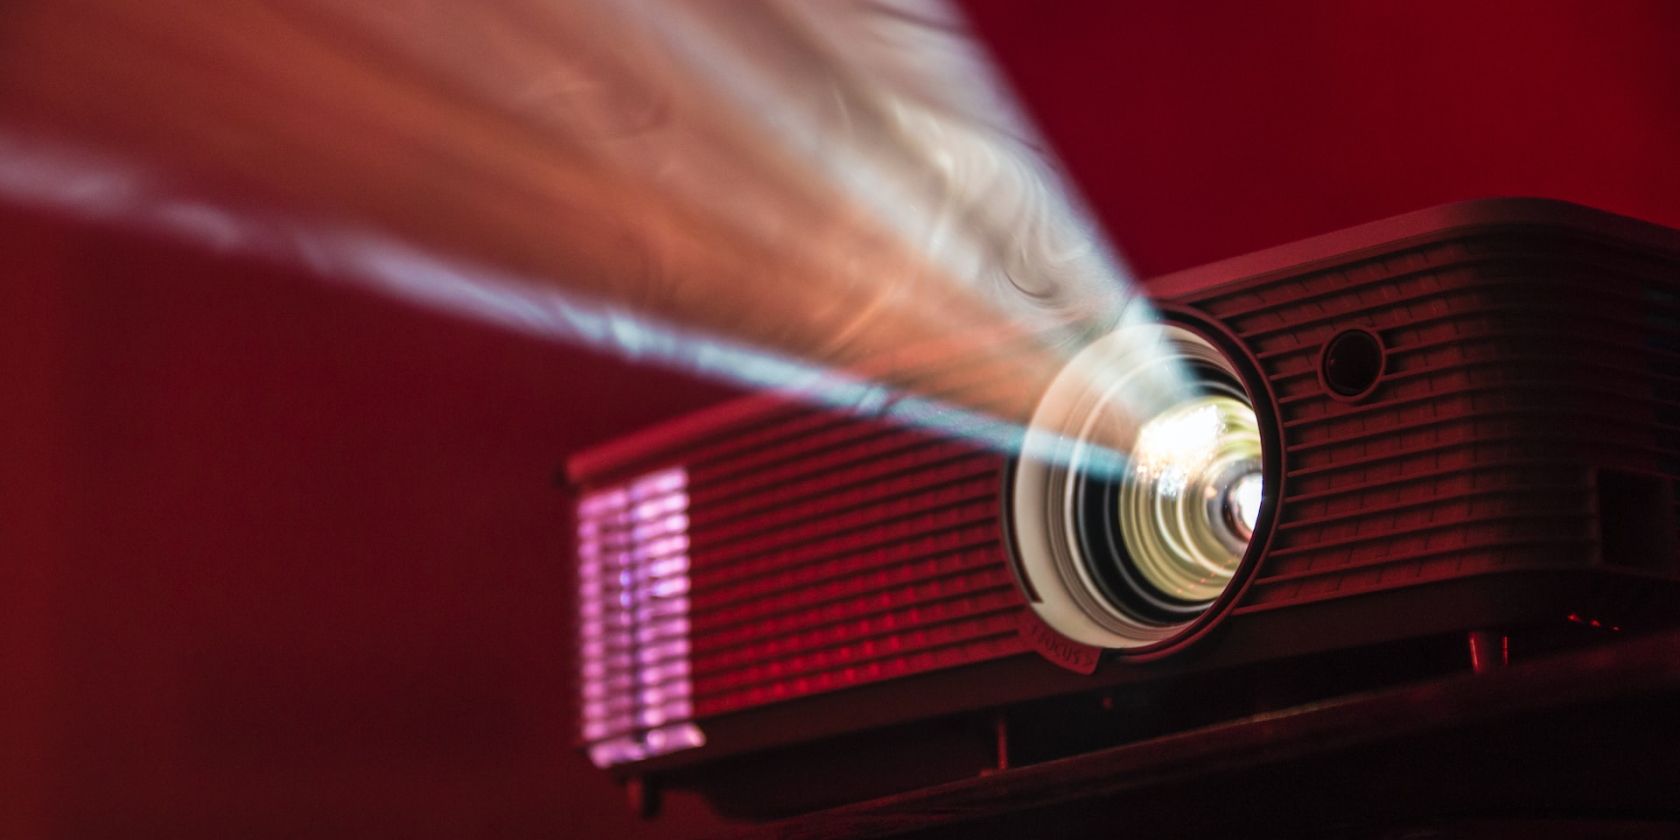 8 Key Factors to Consider When Buying a Projector